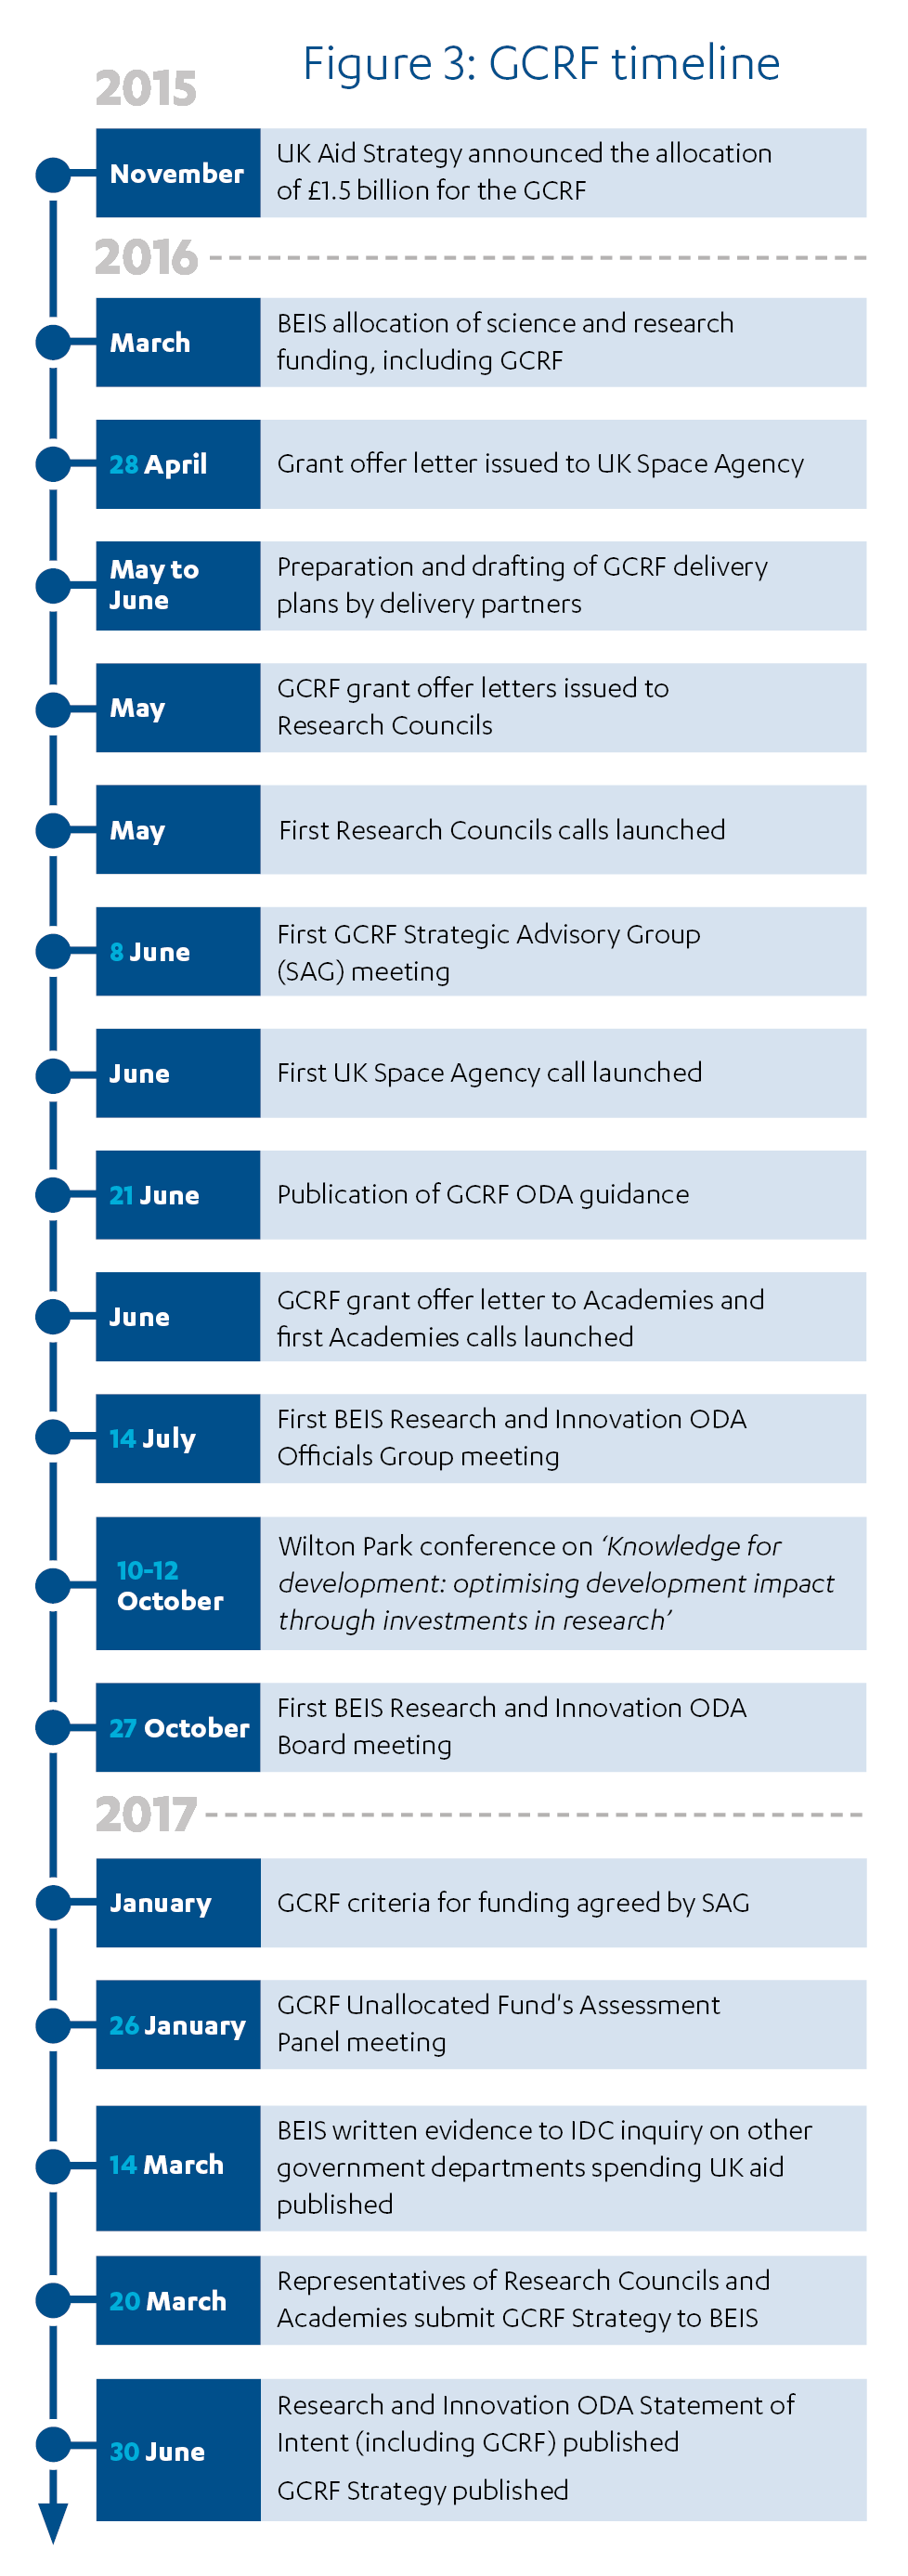 GCRF timeline of key events from 2015 to 2017.